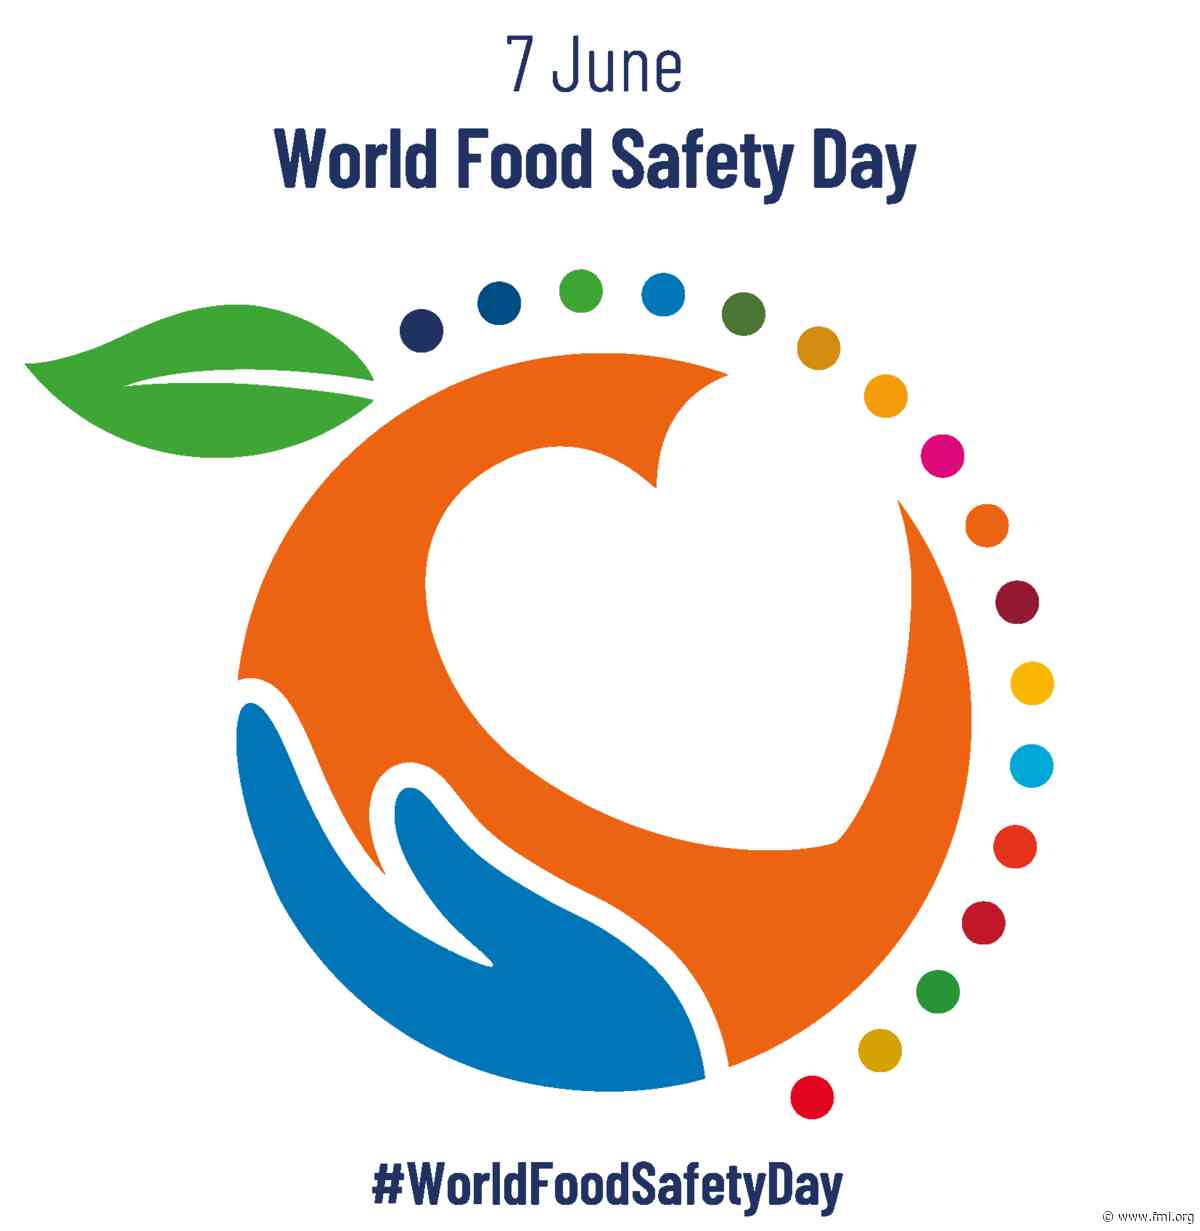 World Food Safety Day: A Reminder to Emphasize Food Safety All Year